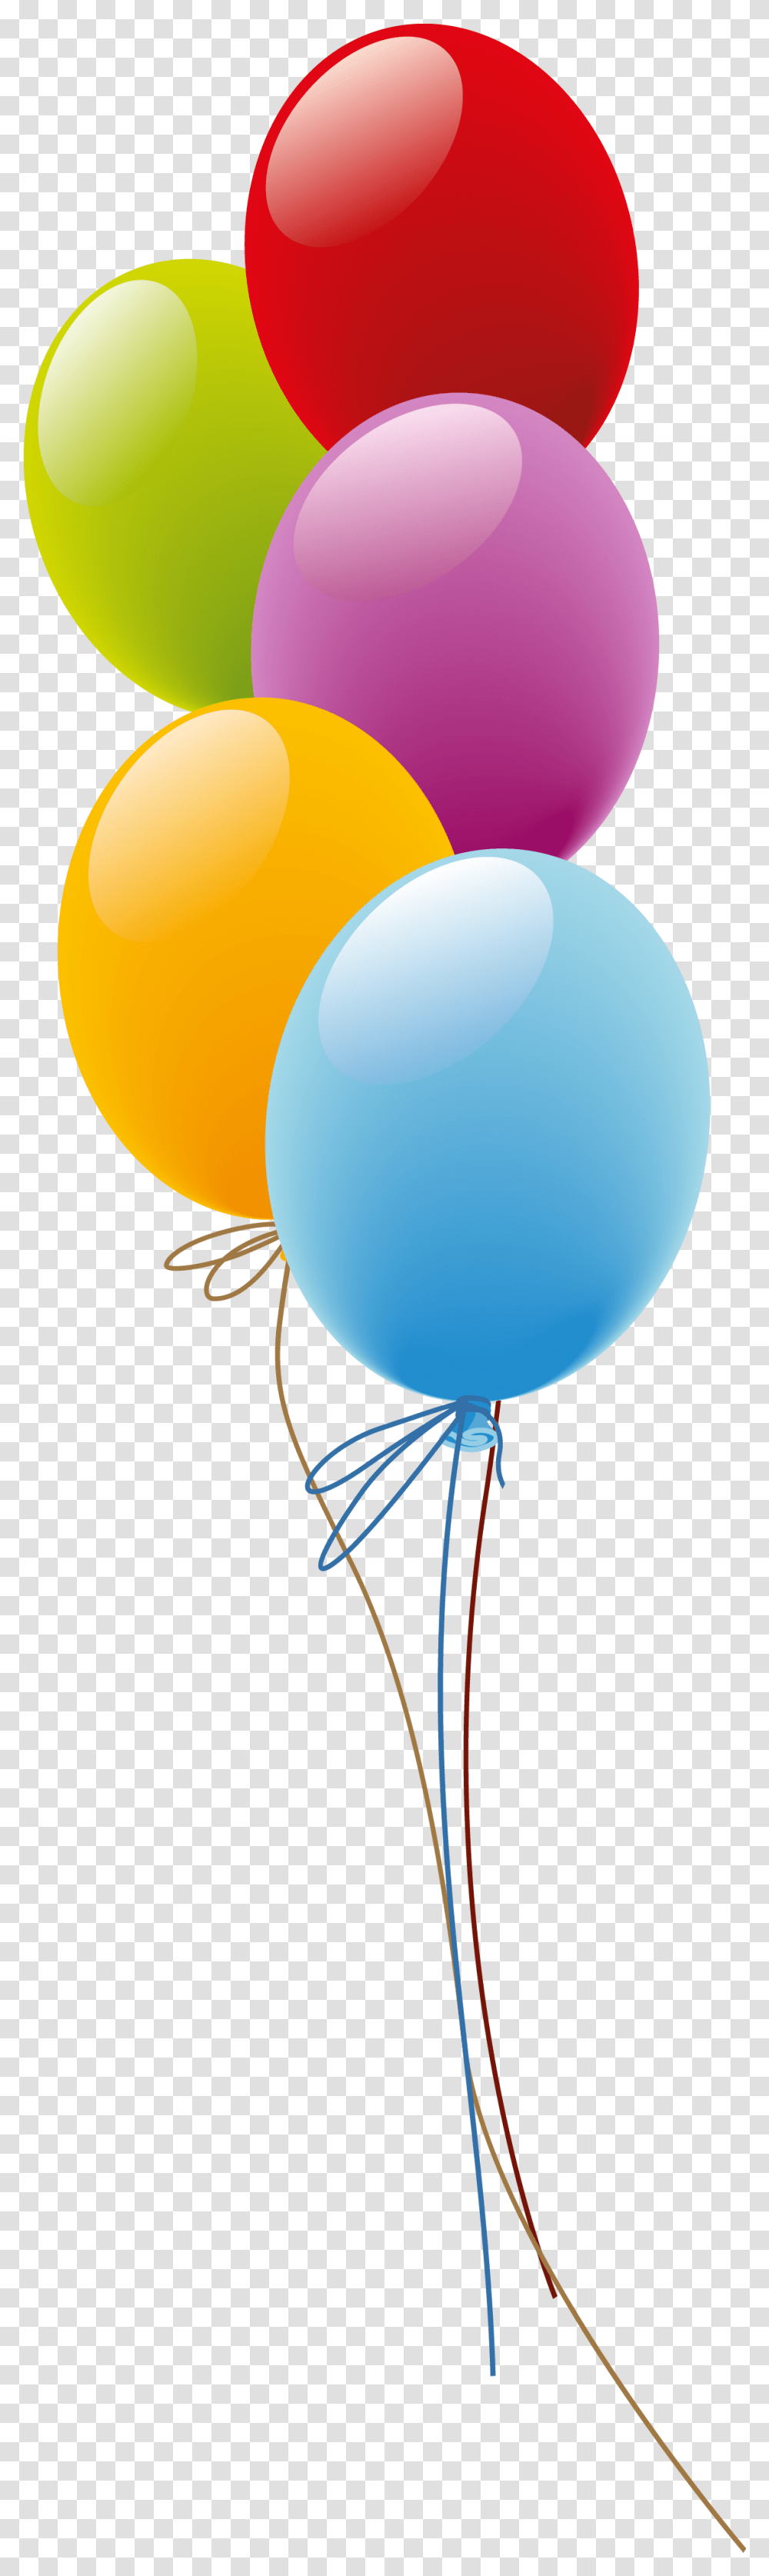 Blue Balloon Birthday Party Balloons Transparent Png